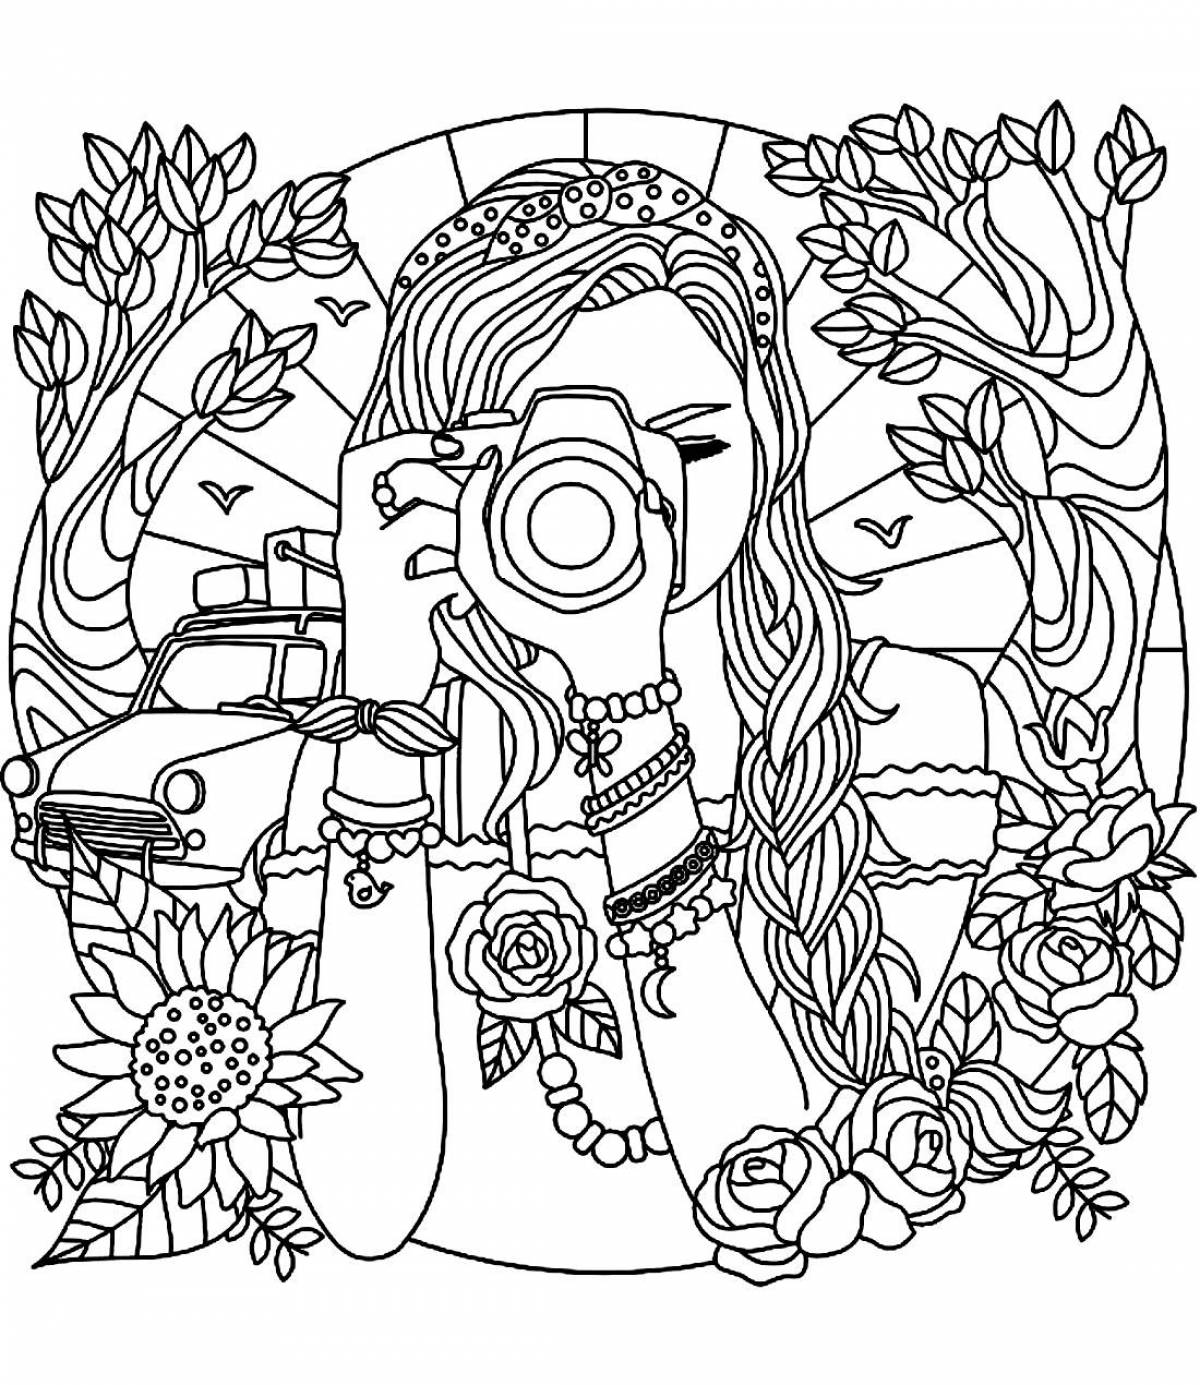 Creative coloring book for girls 10-11 years old